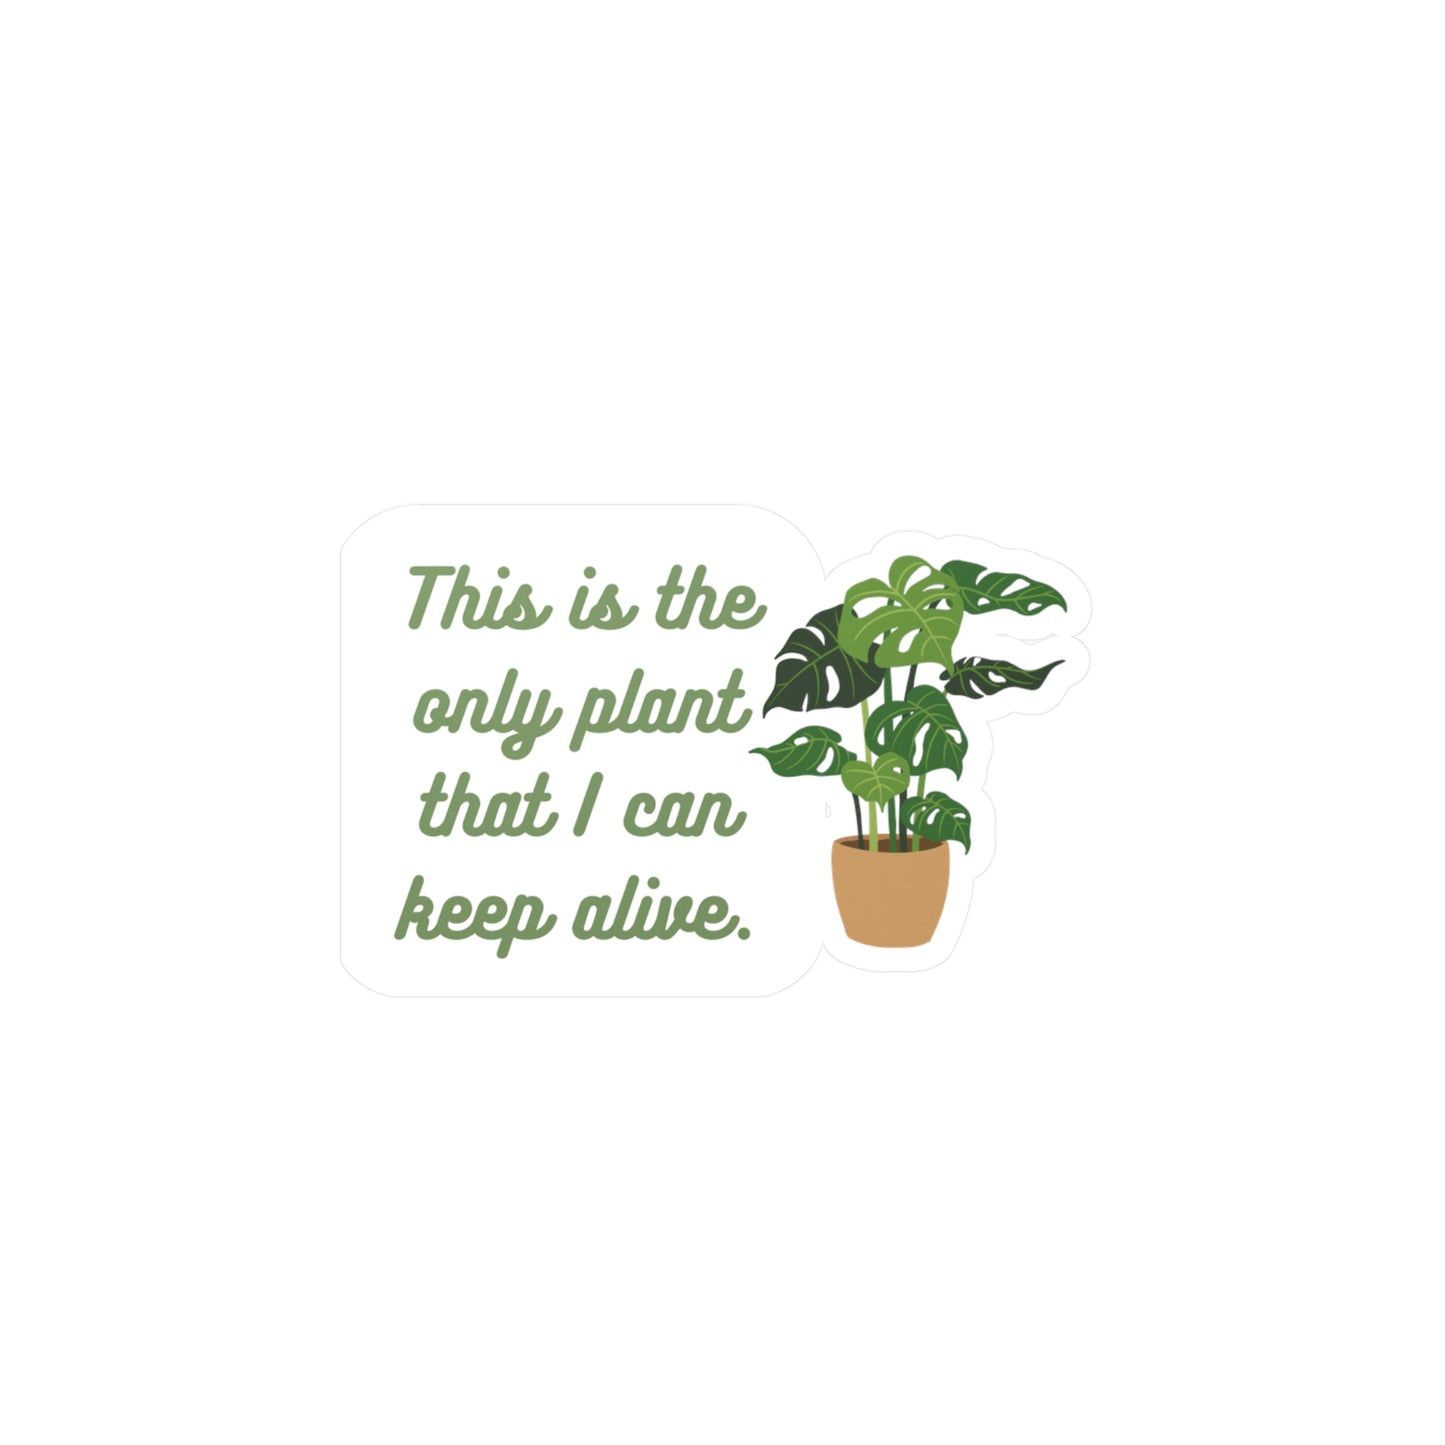 This is the only plant that I can keep alive | Sticker, Plants